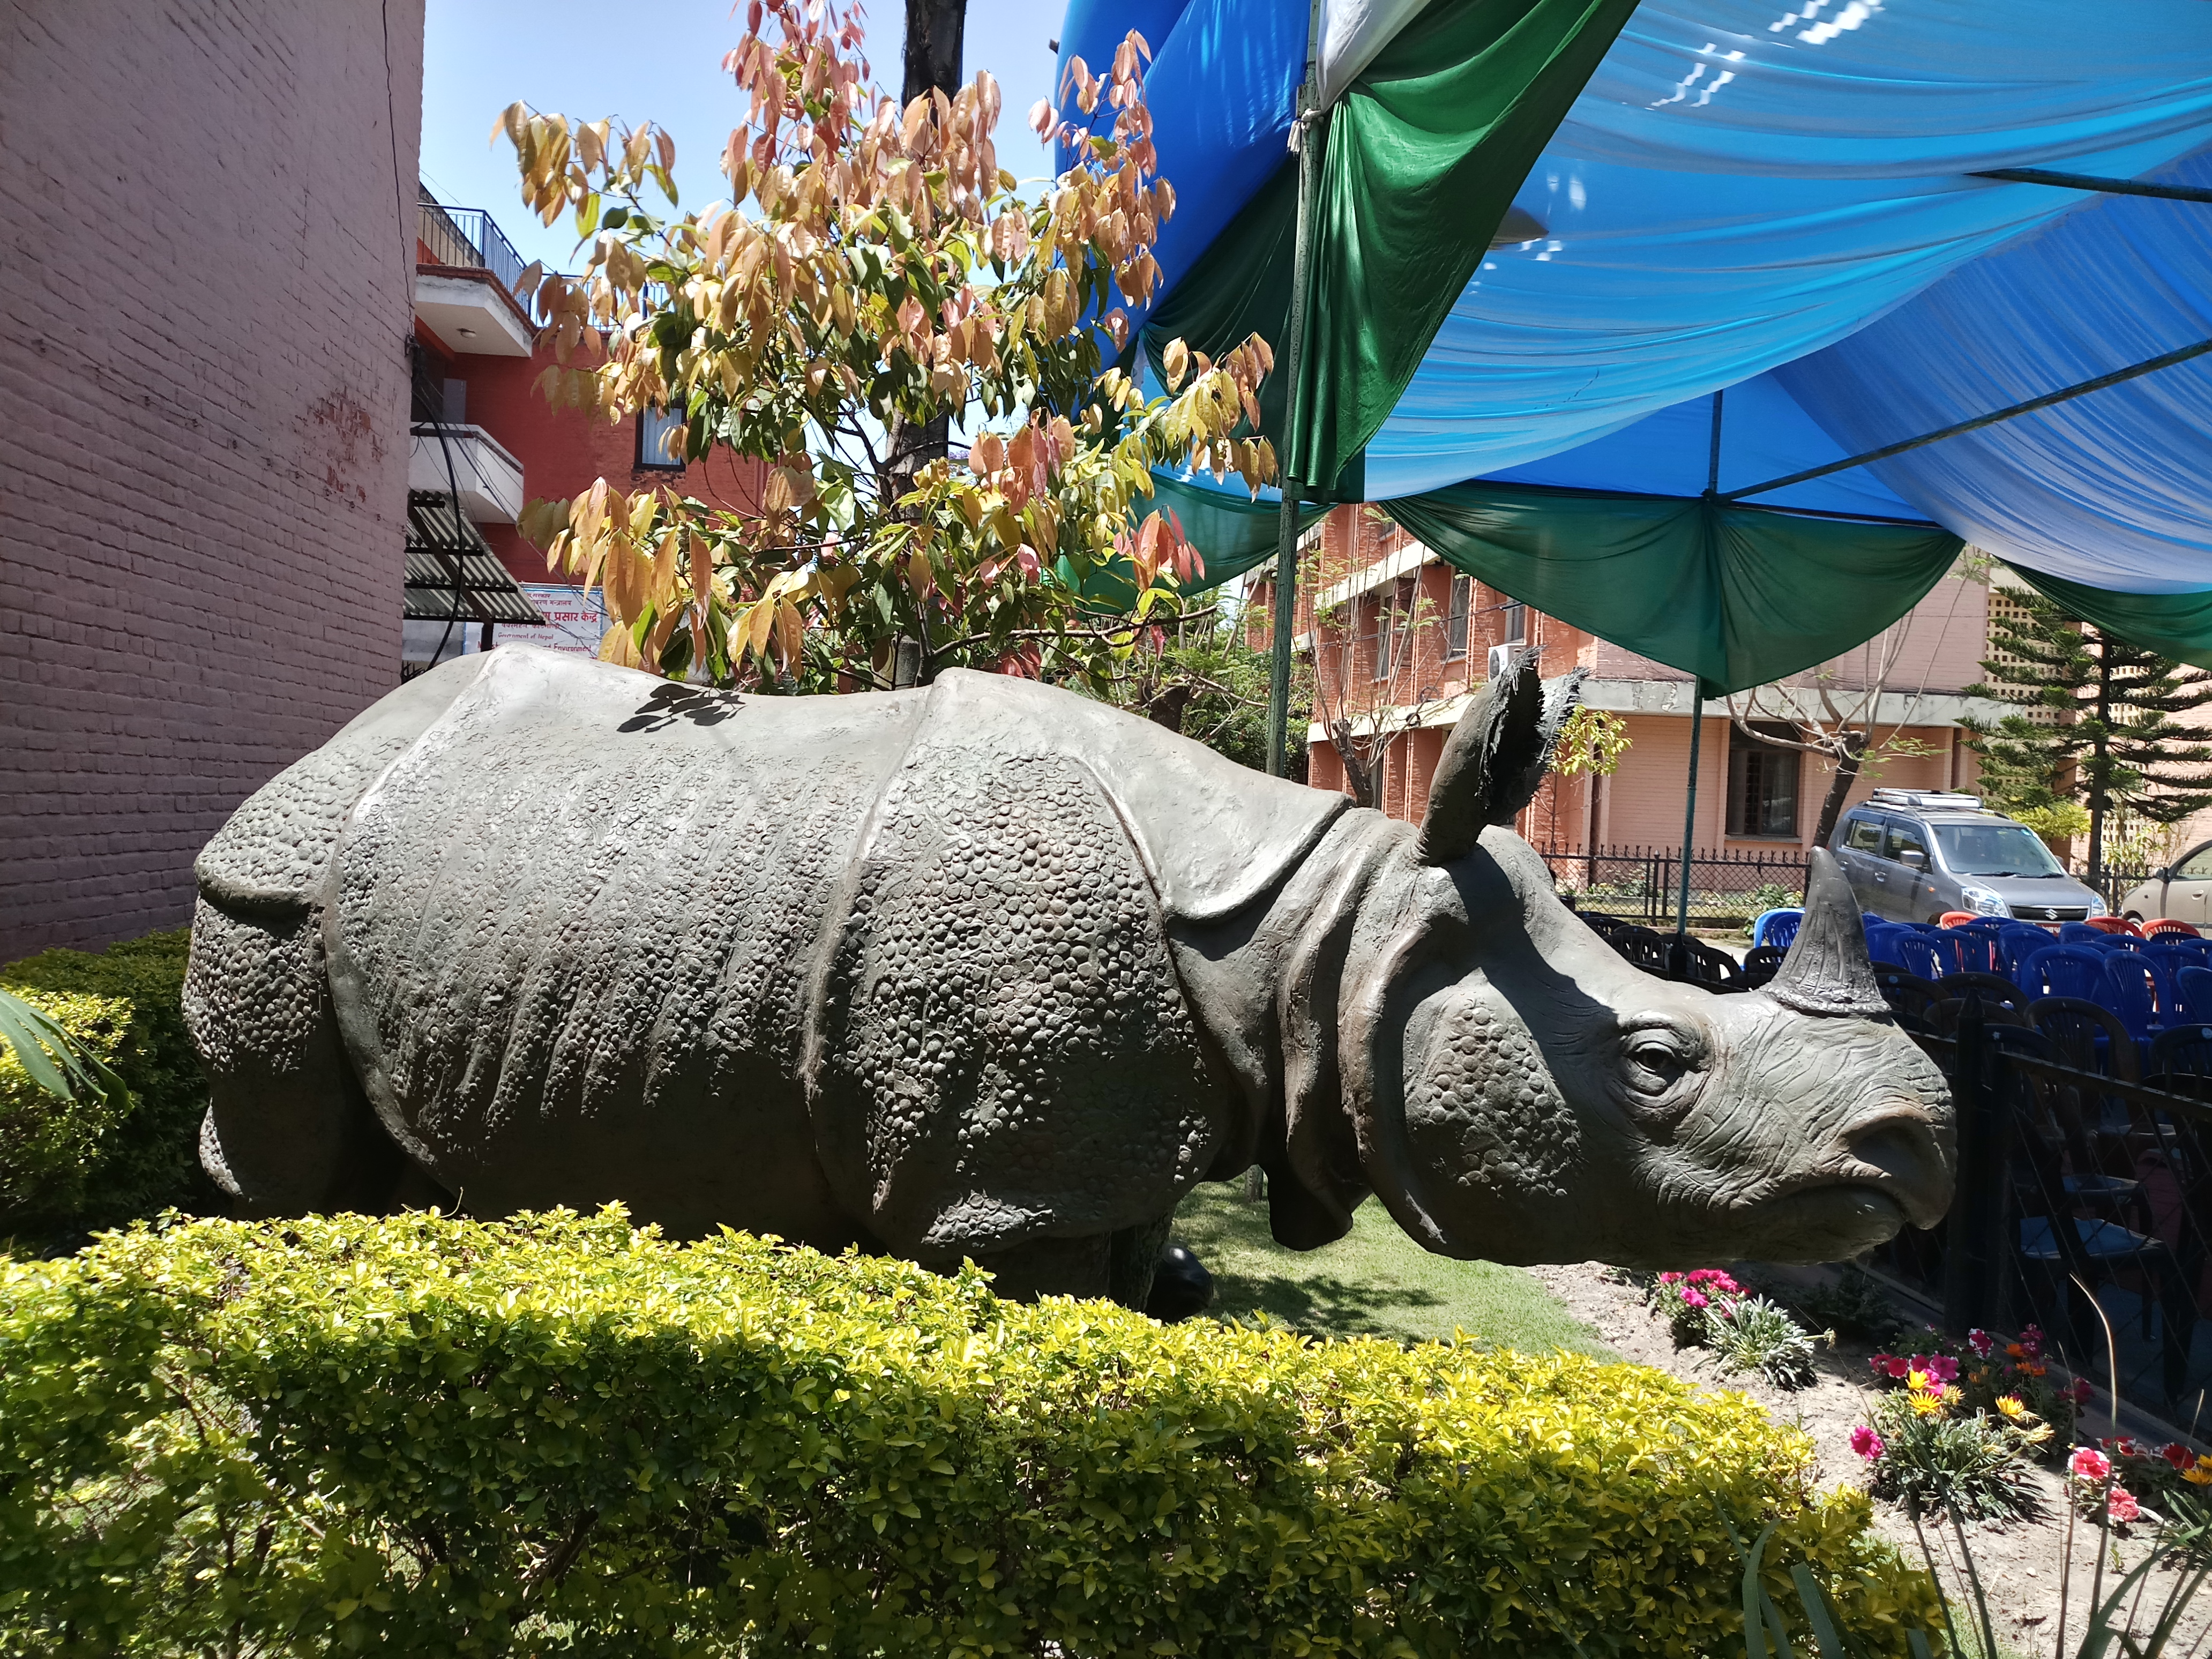 COVID-19: Rhino census not taking place this year